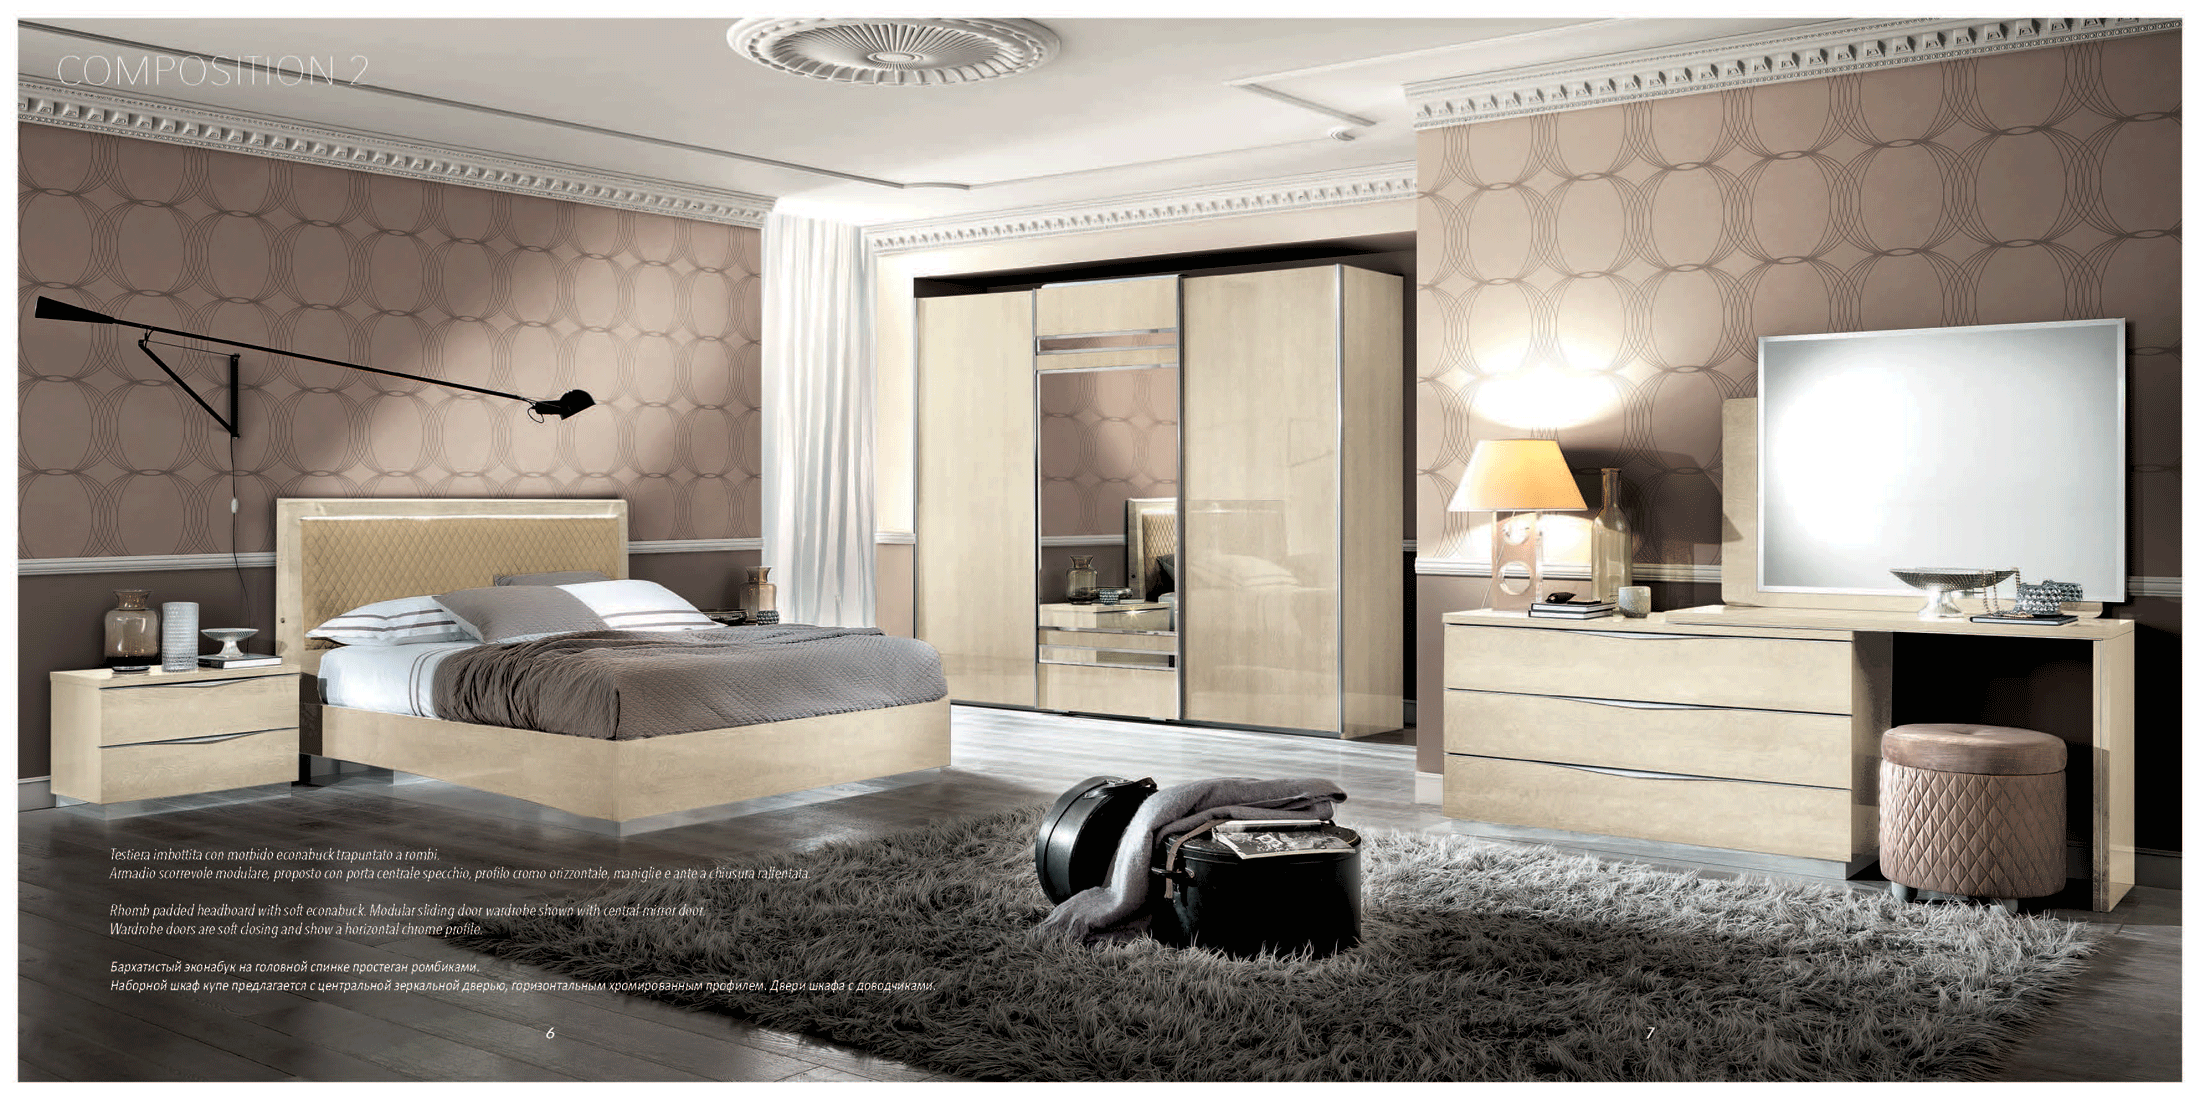 Bedroom Furniture Dressers and Chests Platinum Additional Items IVORY BETULLIA SABBIA